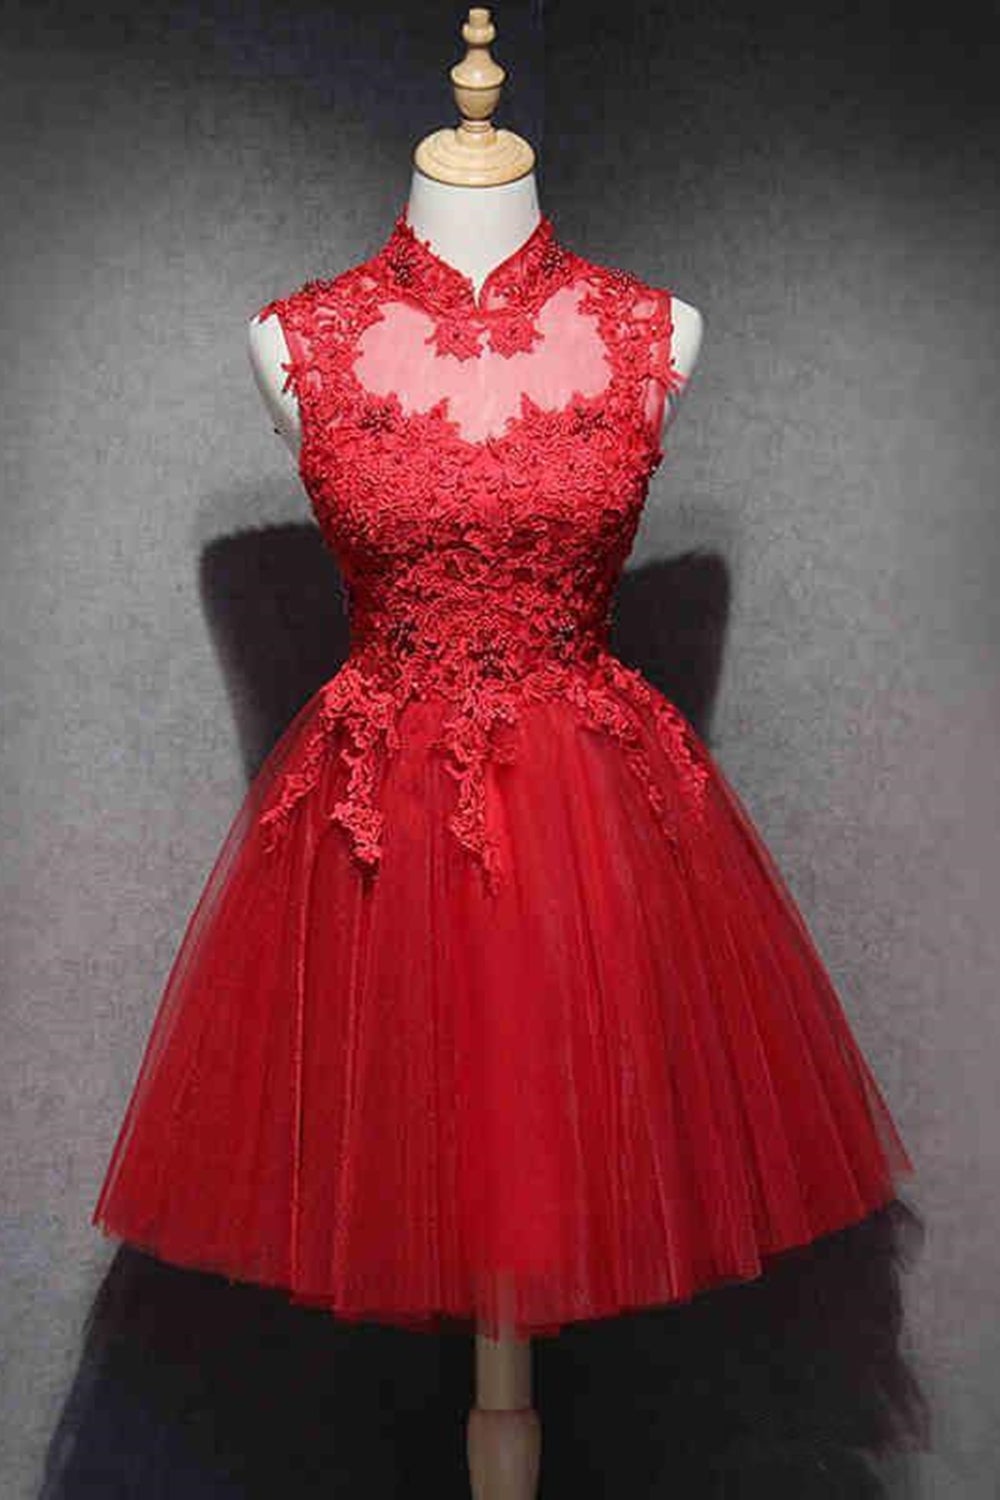 Black Prom Dress, High Neck Red Lace Short Prom Dress,Homecoming Dresses,Red Formal Graduation Evening Dress